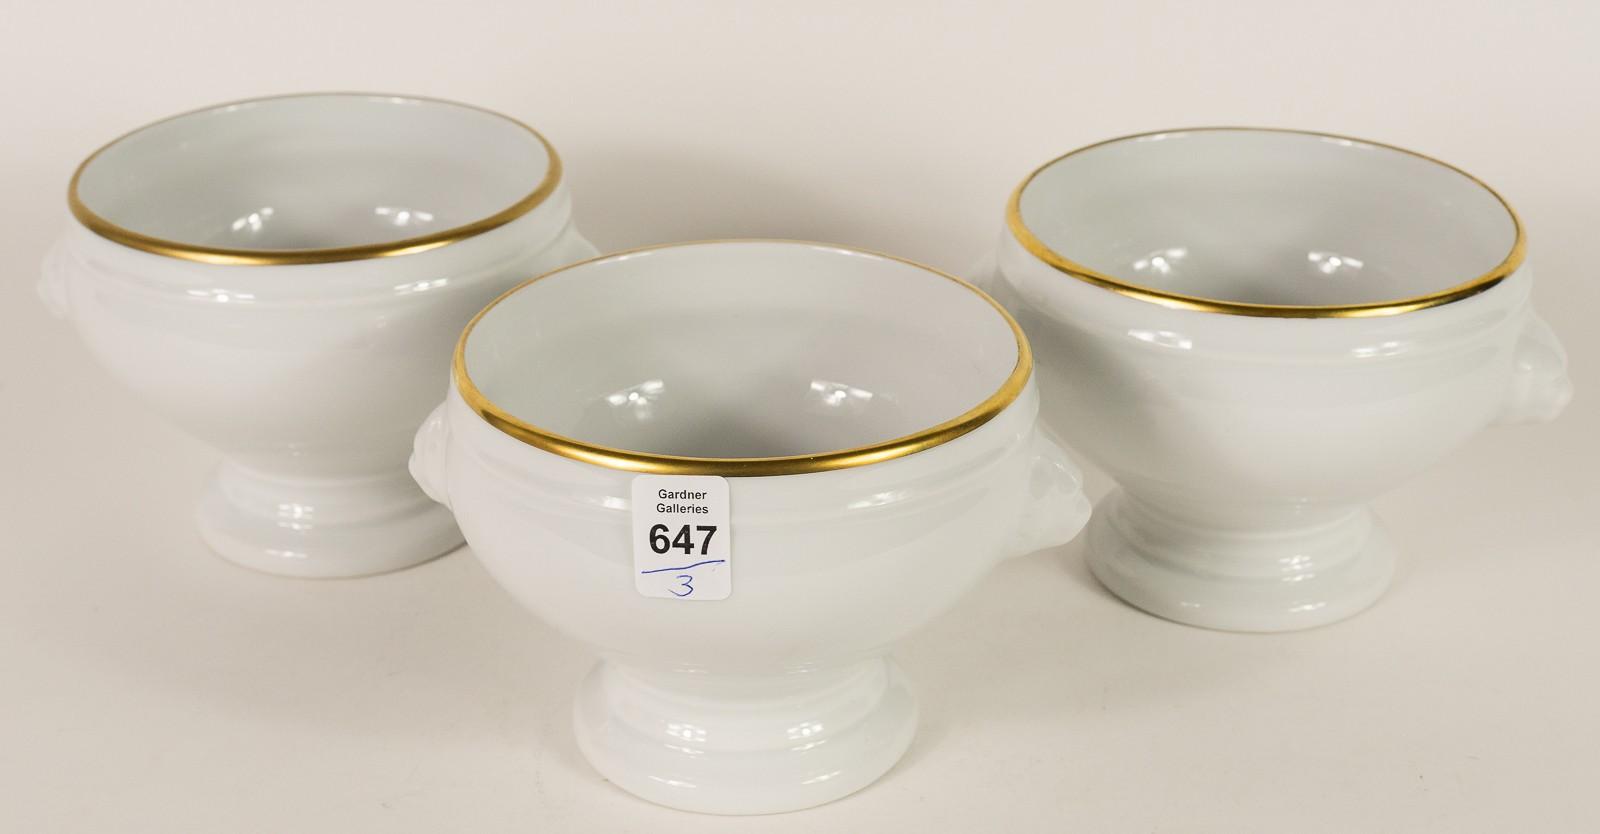 THREE FRENCH PORCELAIN BOWLS